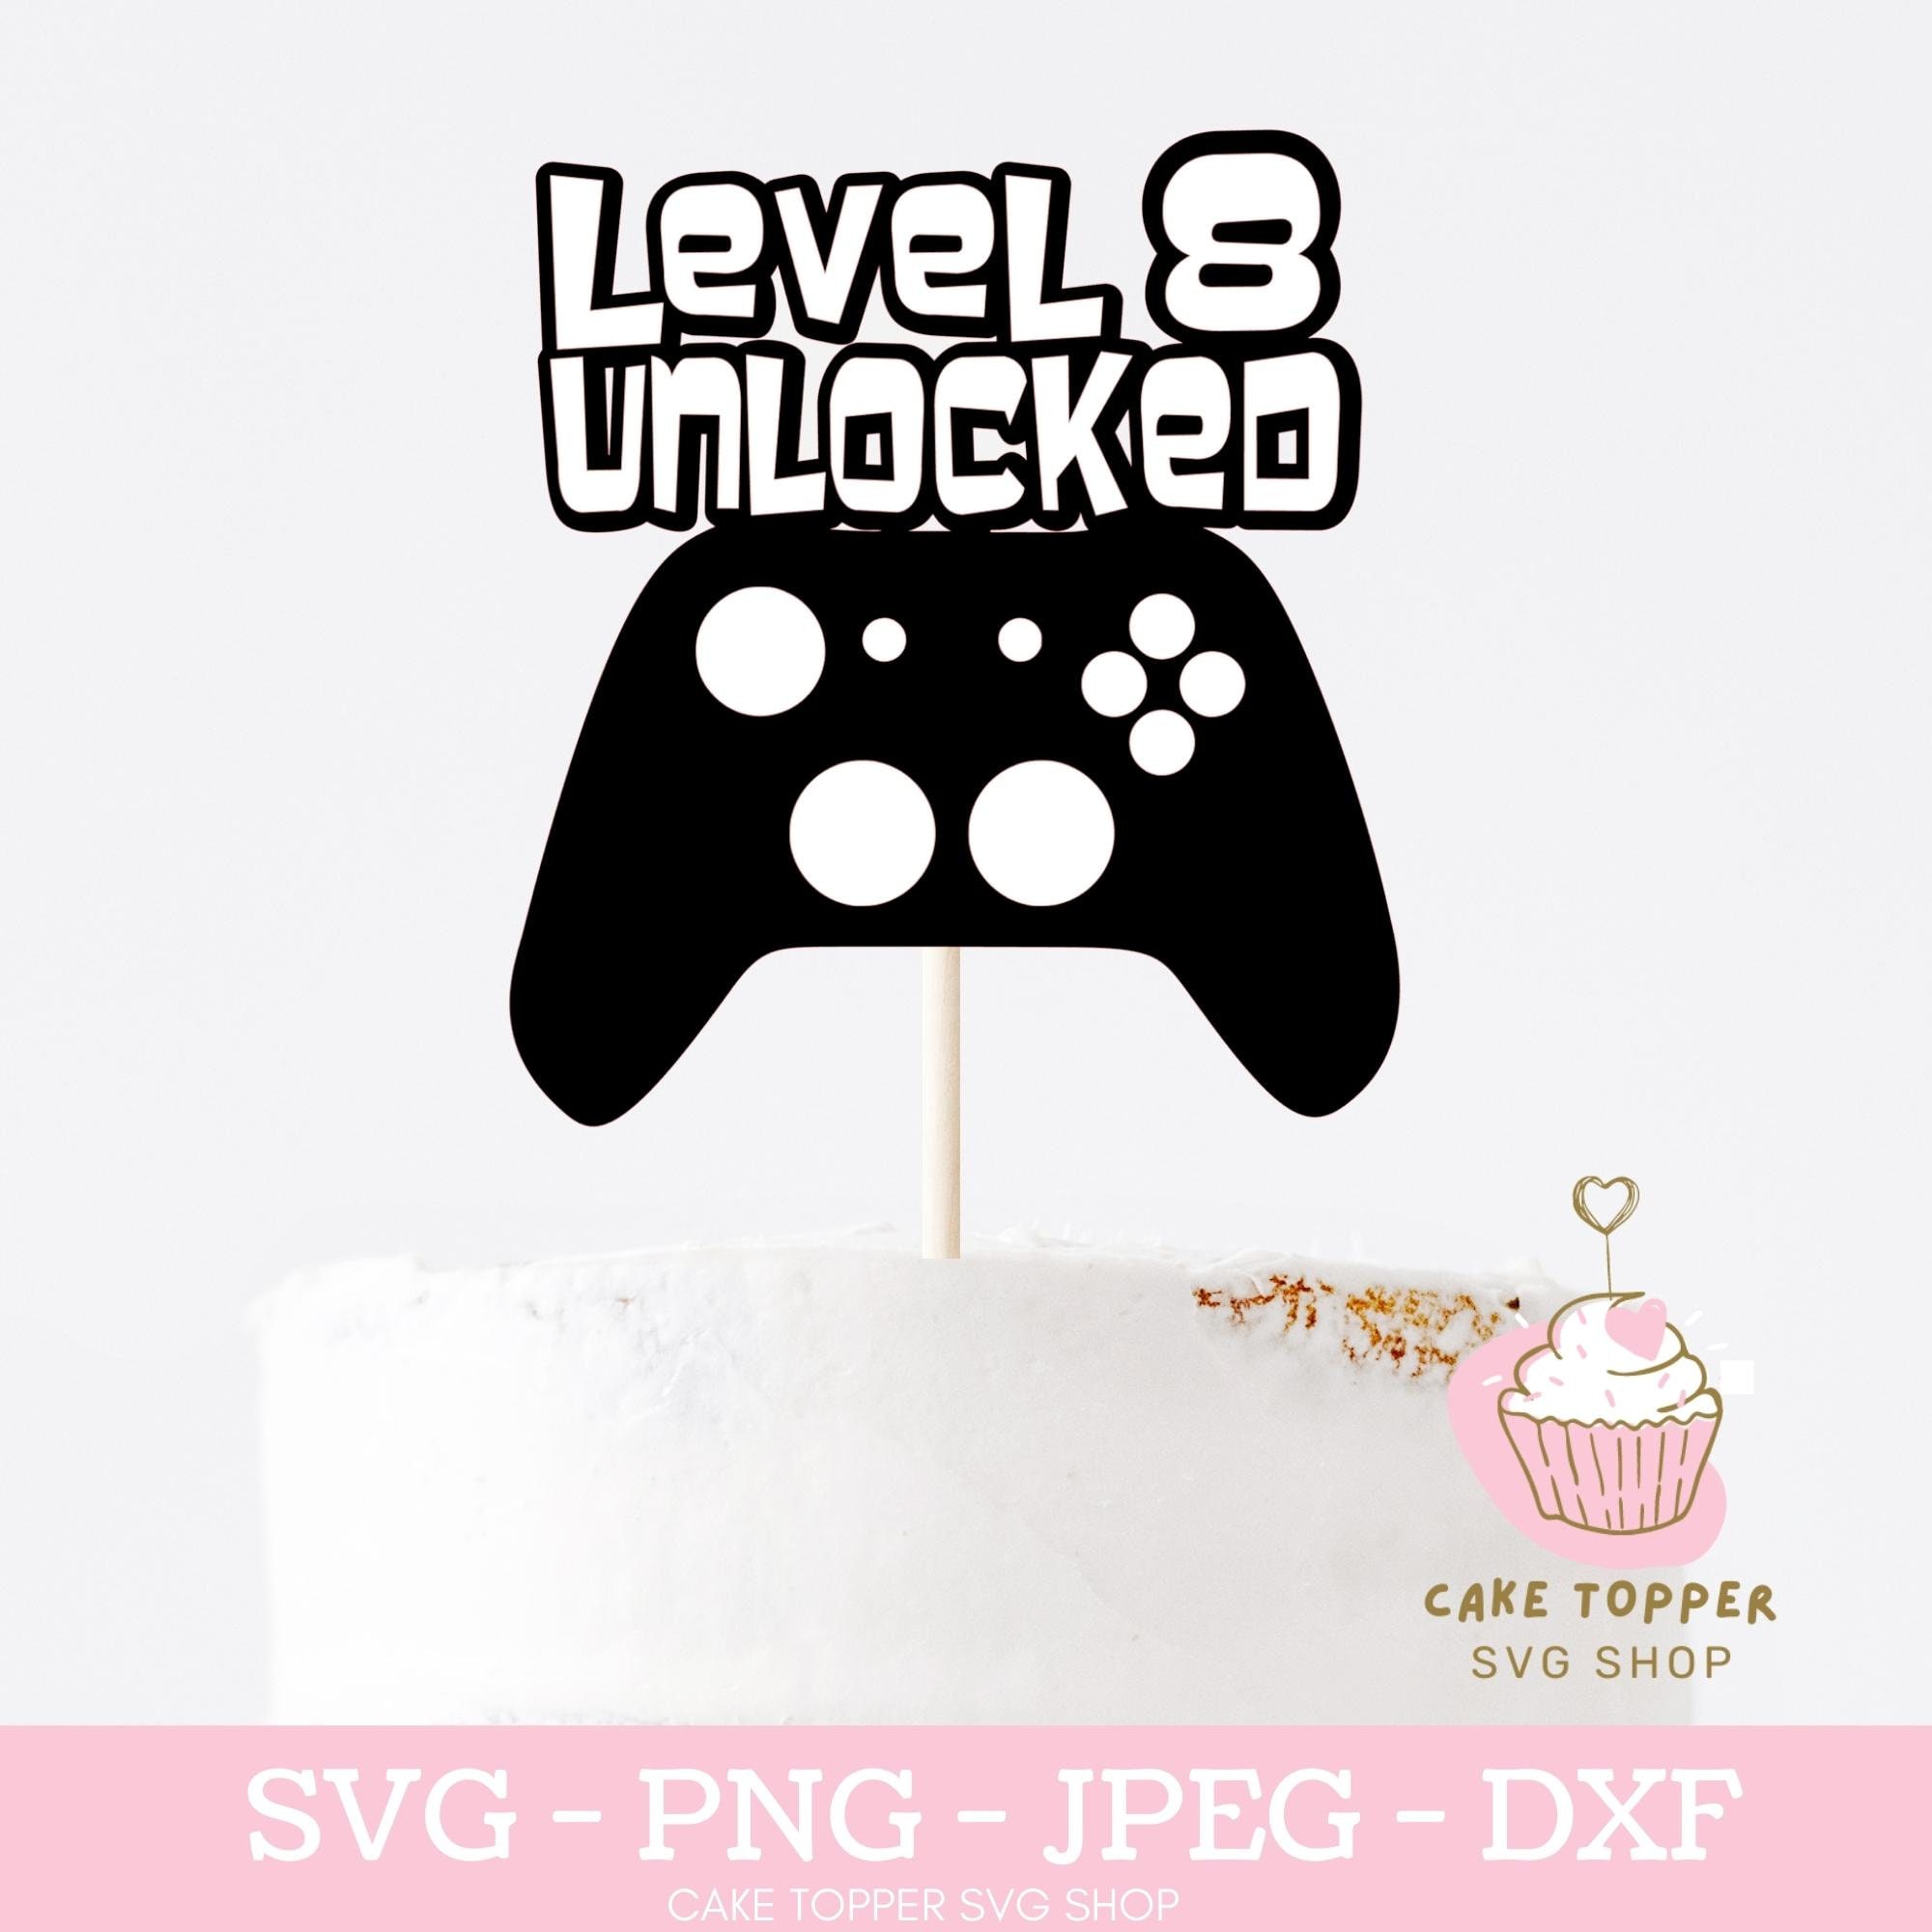 Birthday Celebration Level 8 Unlocked, Video-Game Gaming Controller Poster  for Sale by treasures83